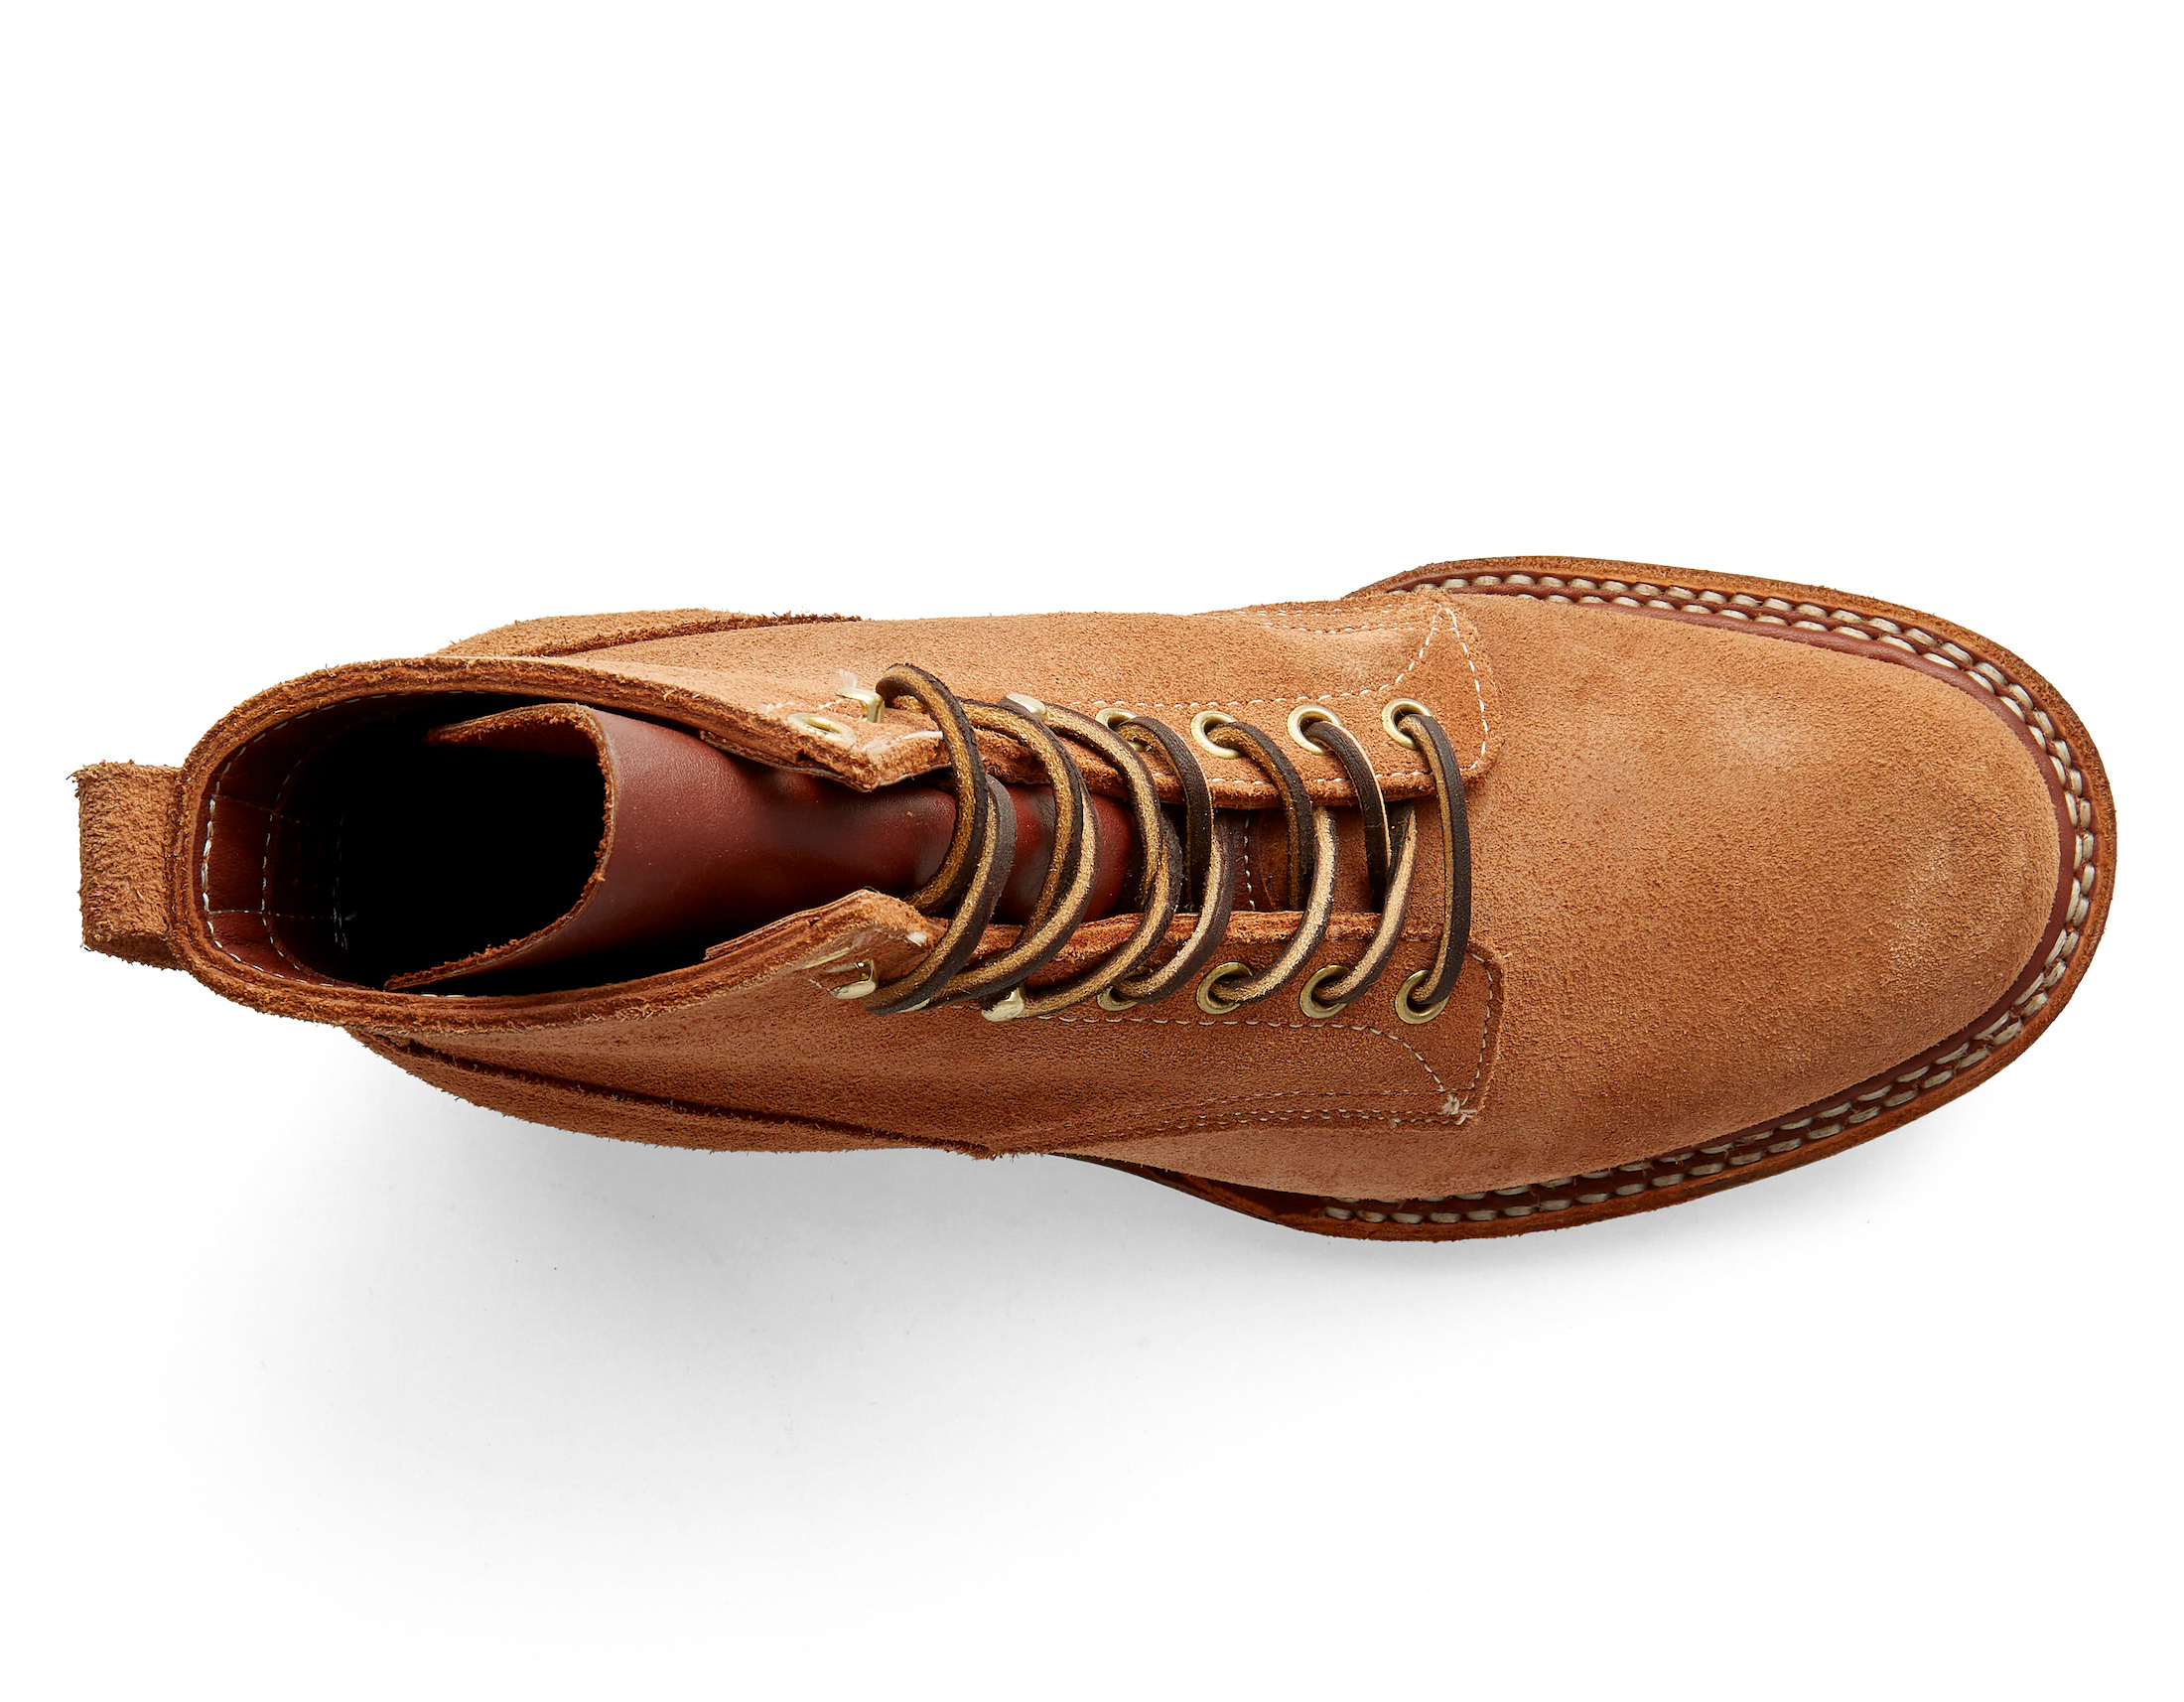 The American Made 350 Cruiser-MV Roughout Boots By White's Boots